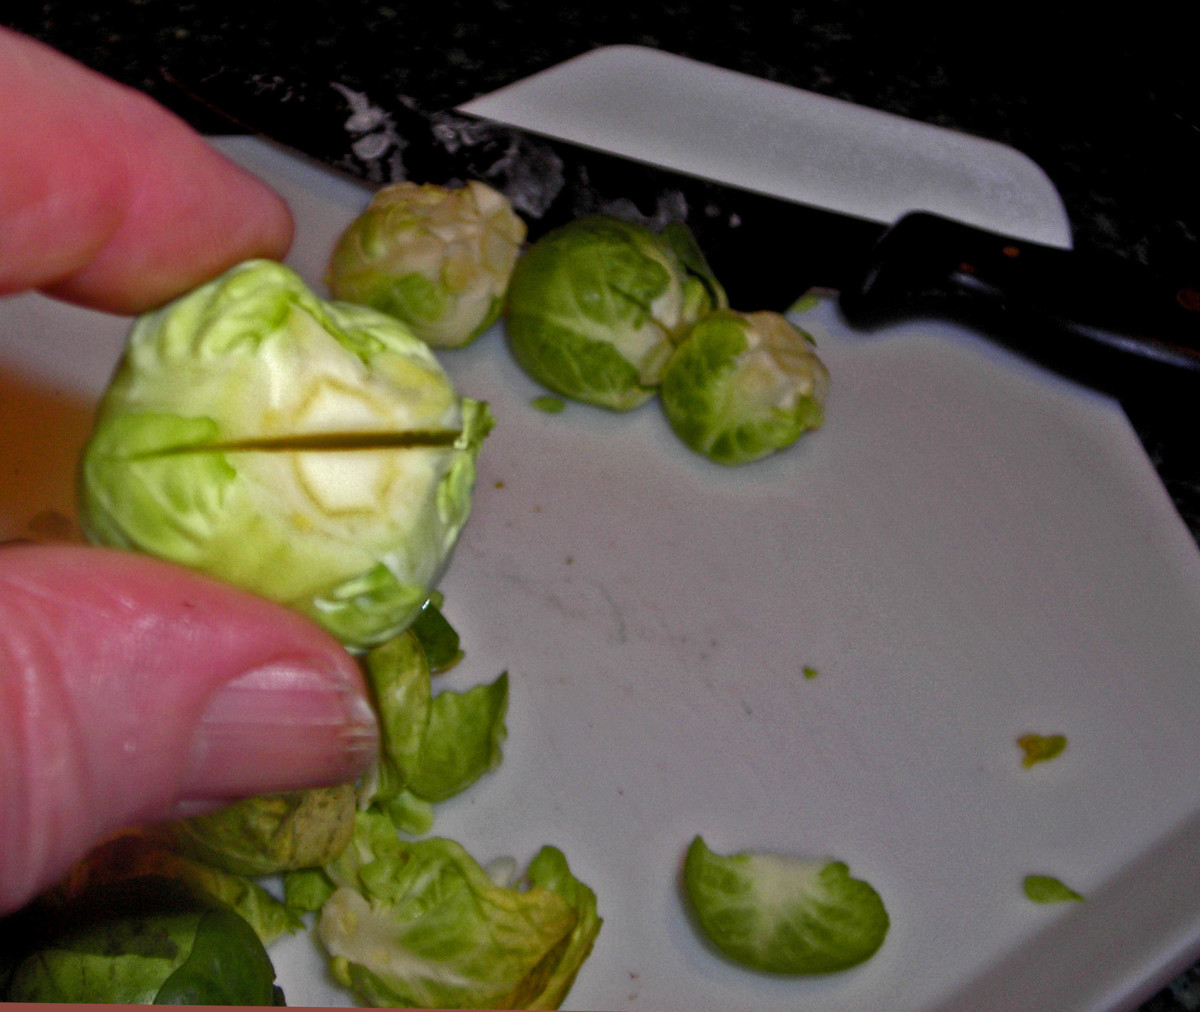 Cutting Brussels sprouts